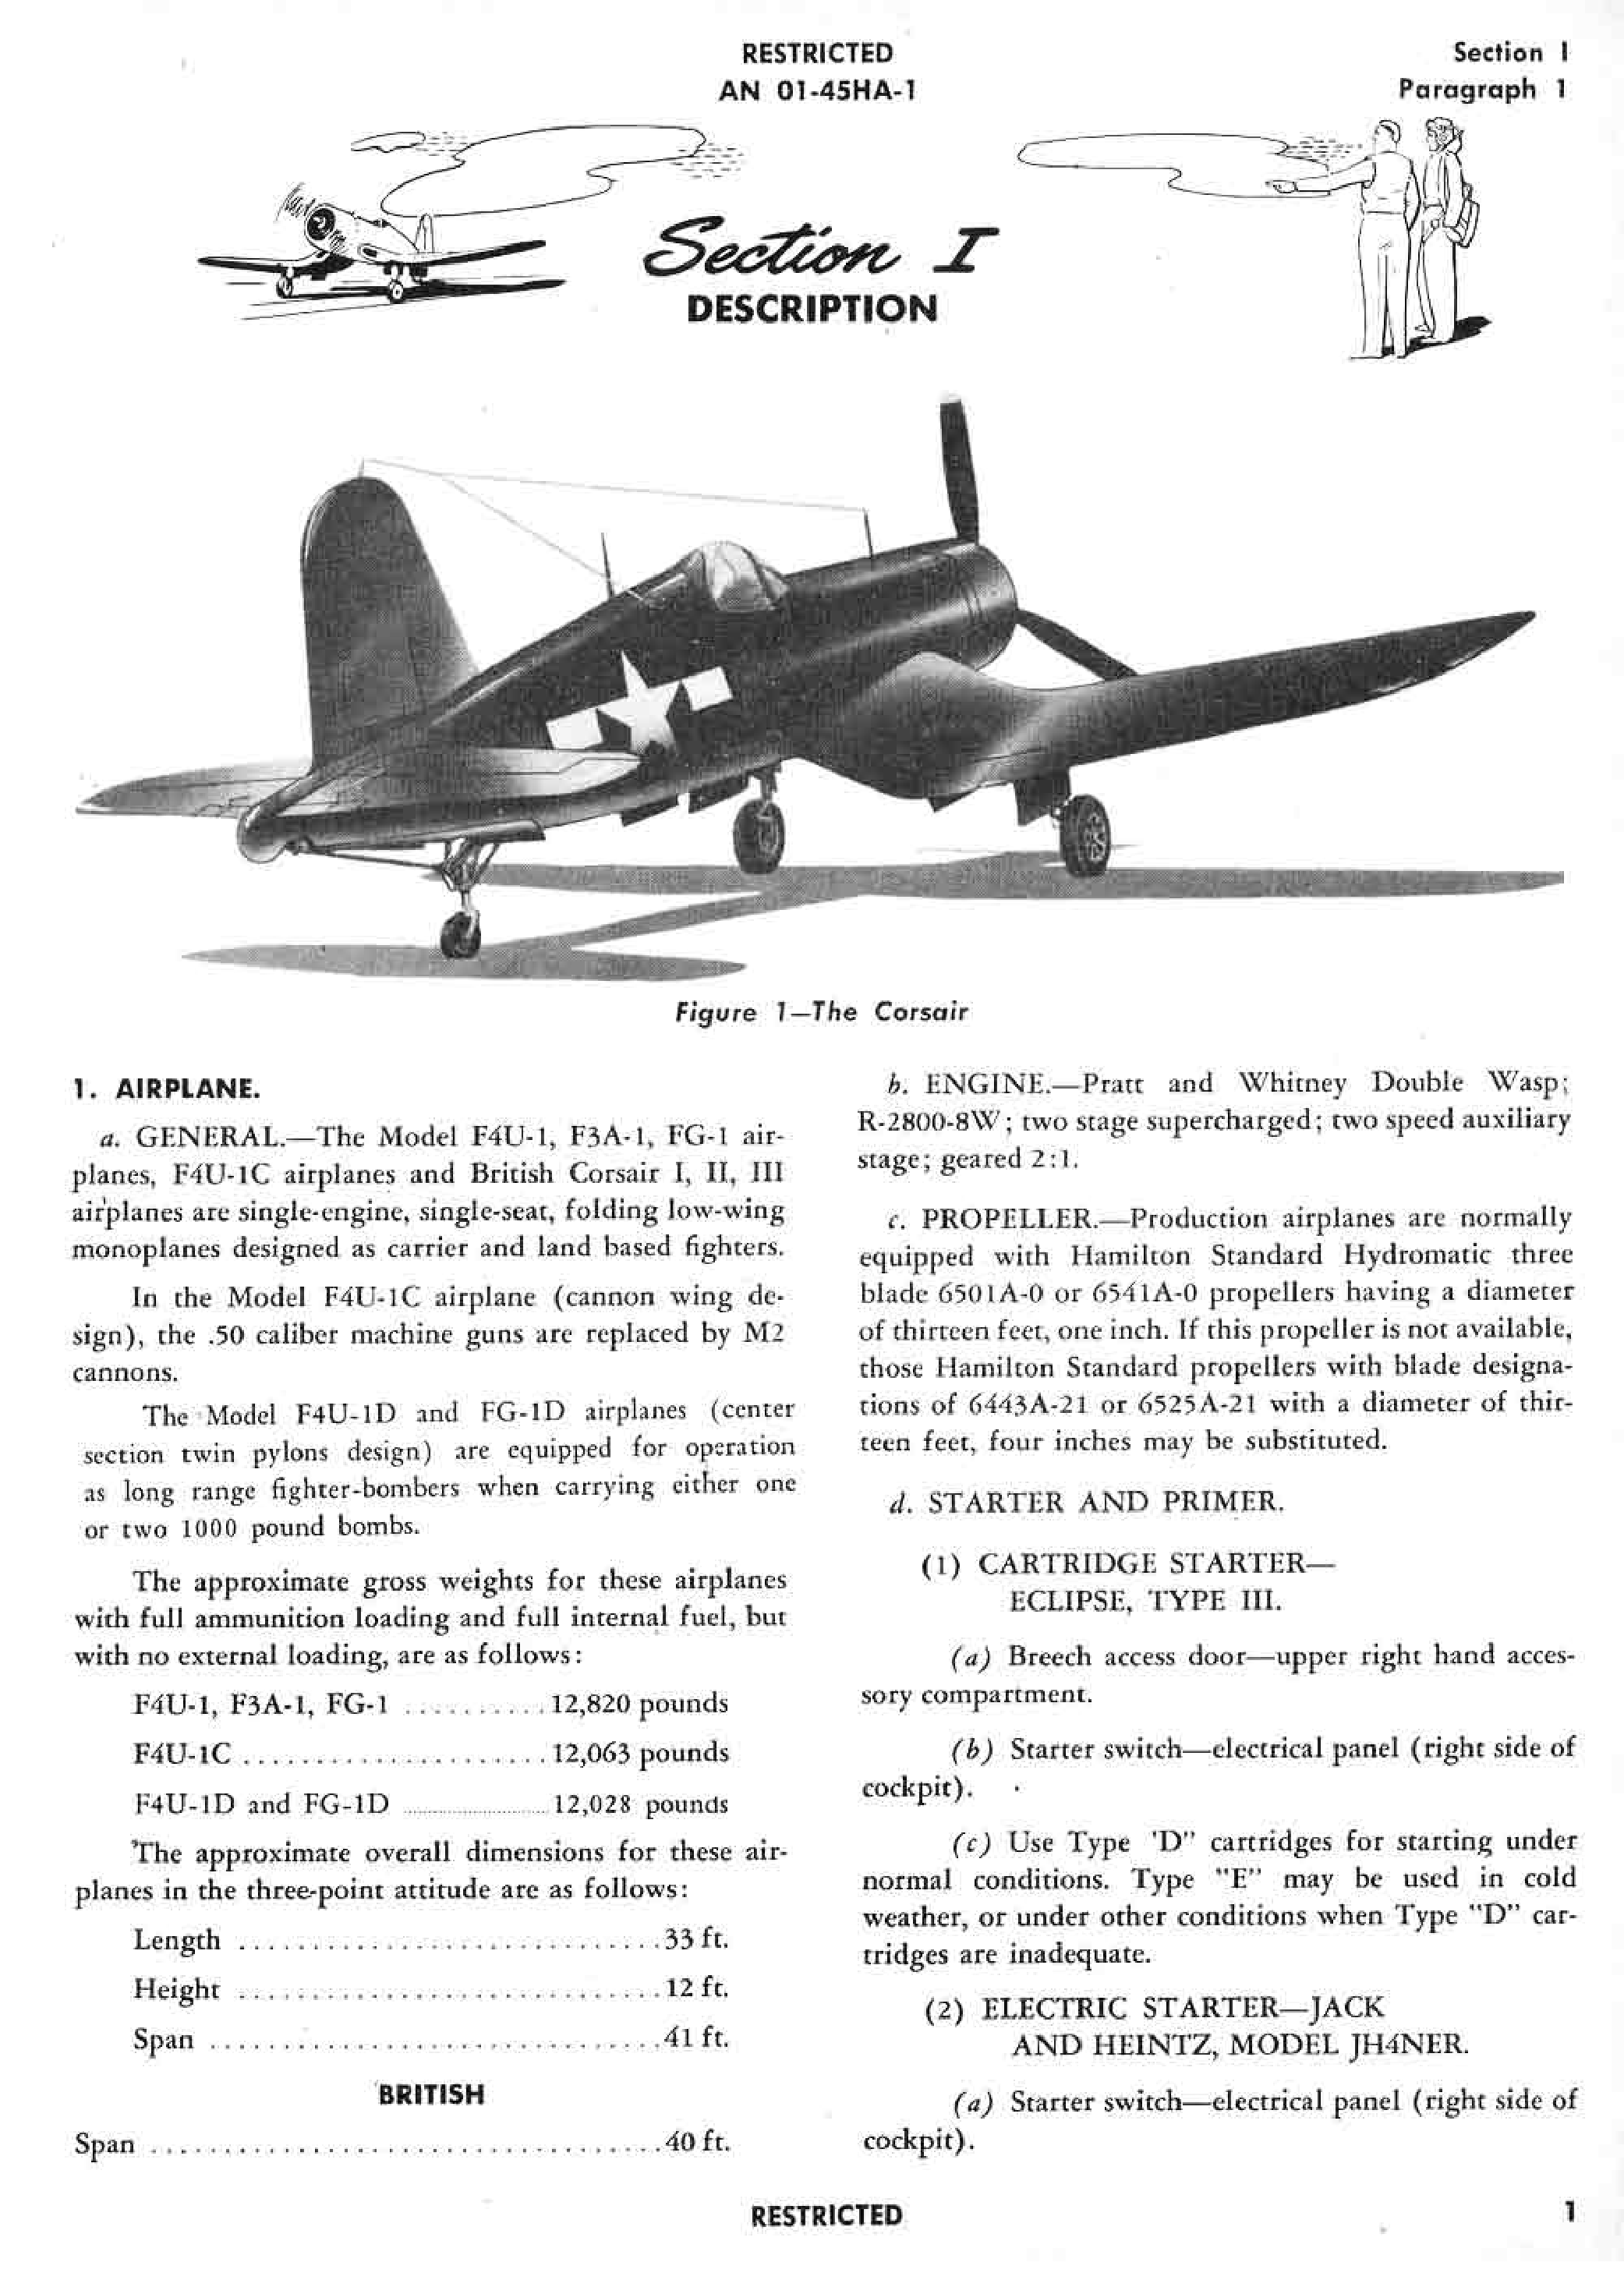 Sample page 7 from AirCorps Library document: Pilot's Handbook - Corsair - F4U, F3A, FG1